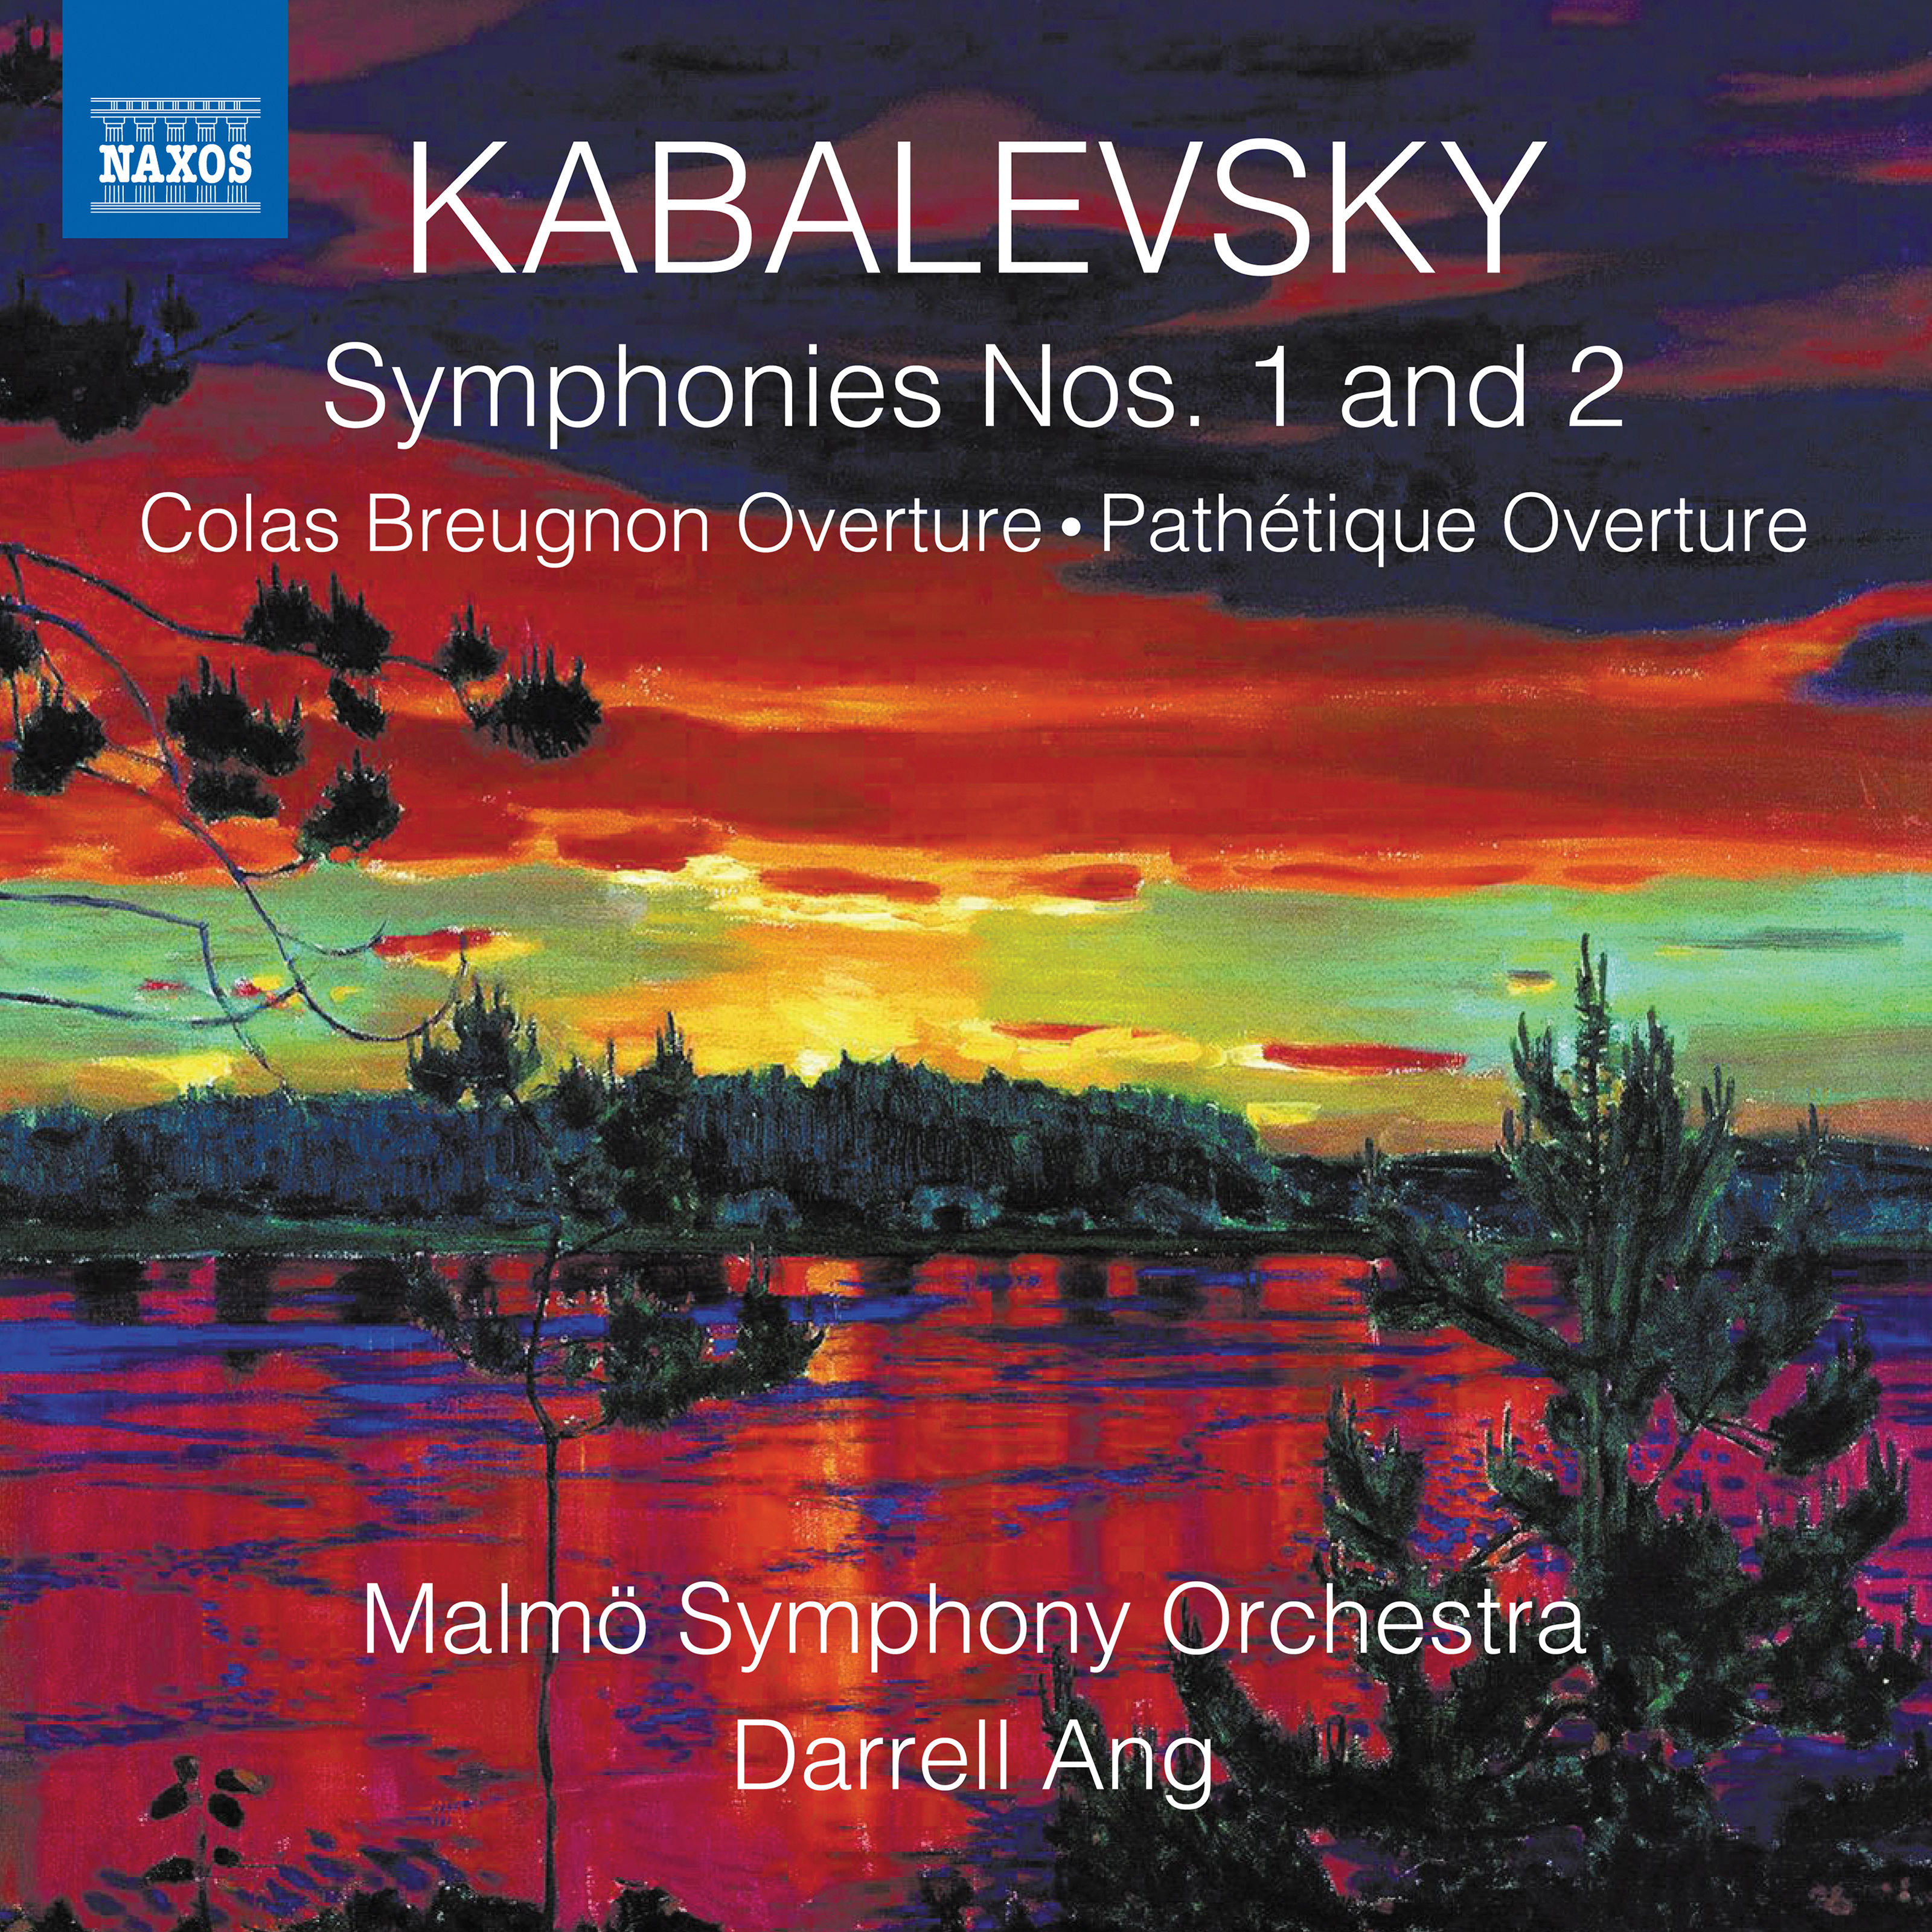 Malmo Symphony Orchestra & Darrell Ang – Kabalevsky: Works for Orchestra (2019) [FLAC 24bit/96kHz]